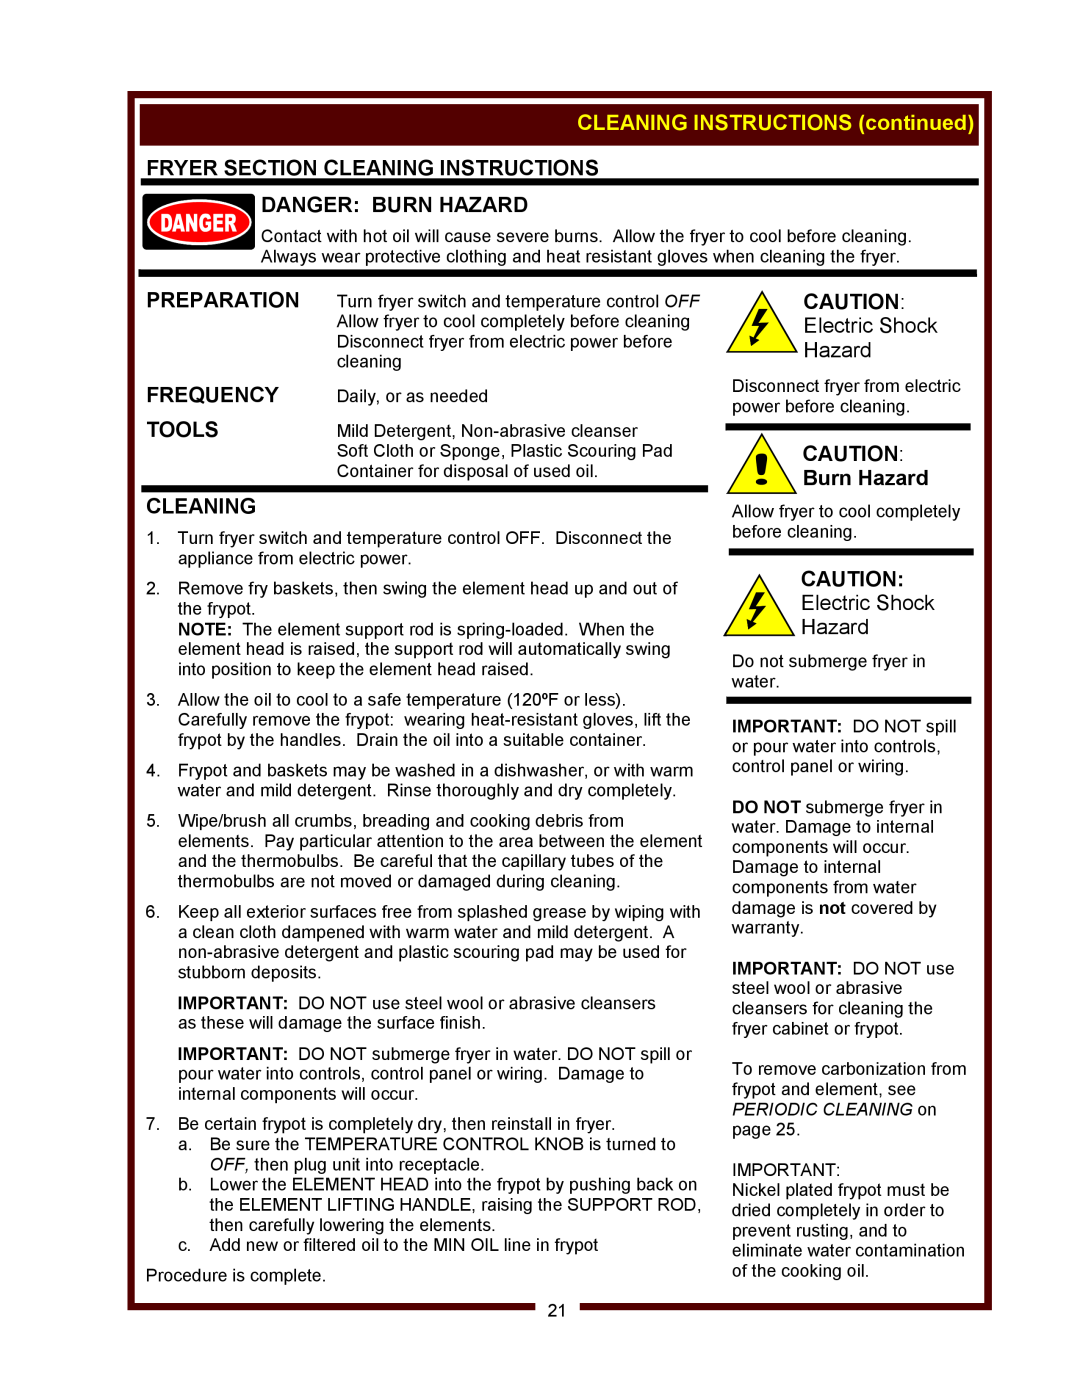 Wells WV-FGRW CLEANING INSTRUCTIONS continued, Fryer Section Cleaning Instructions Danger Burn Hazard, Preparation, Tools 